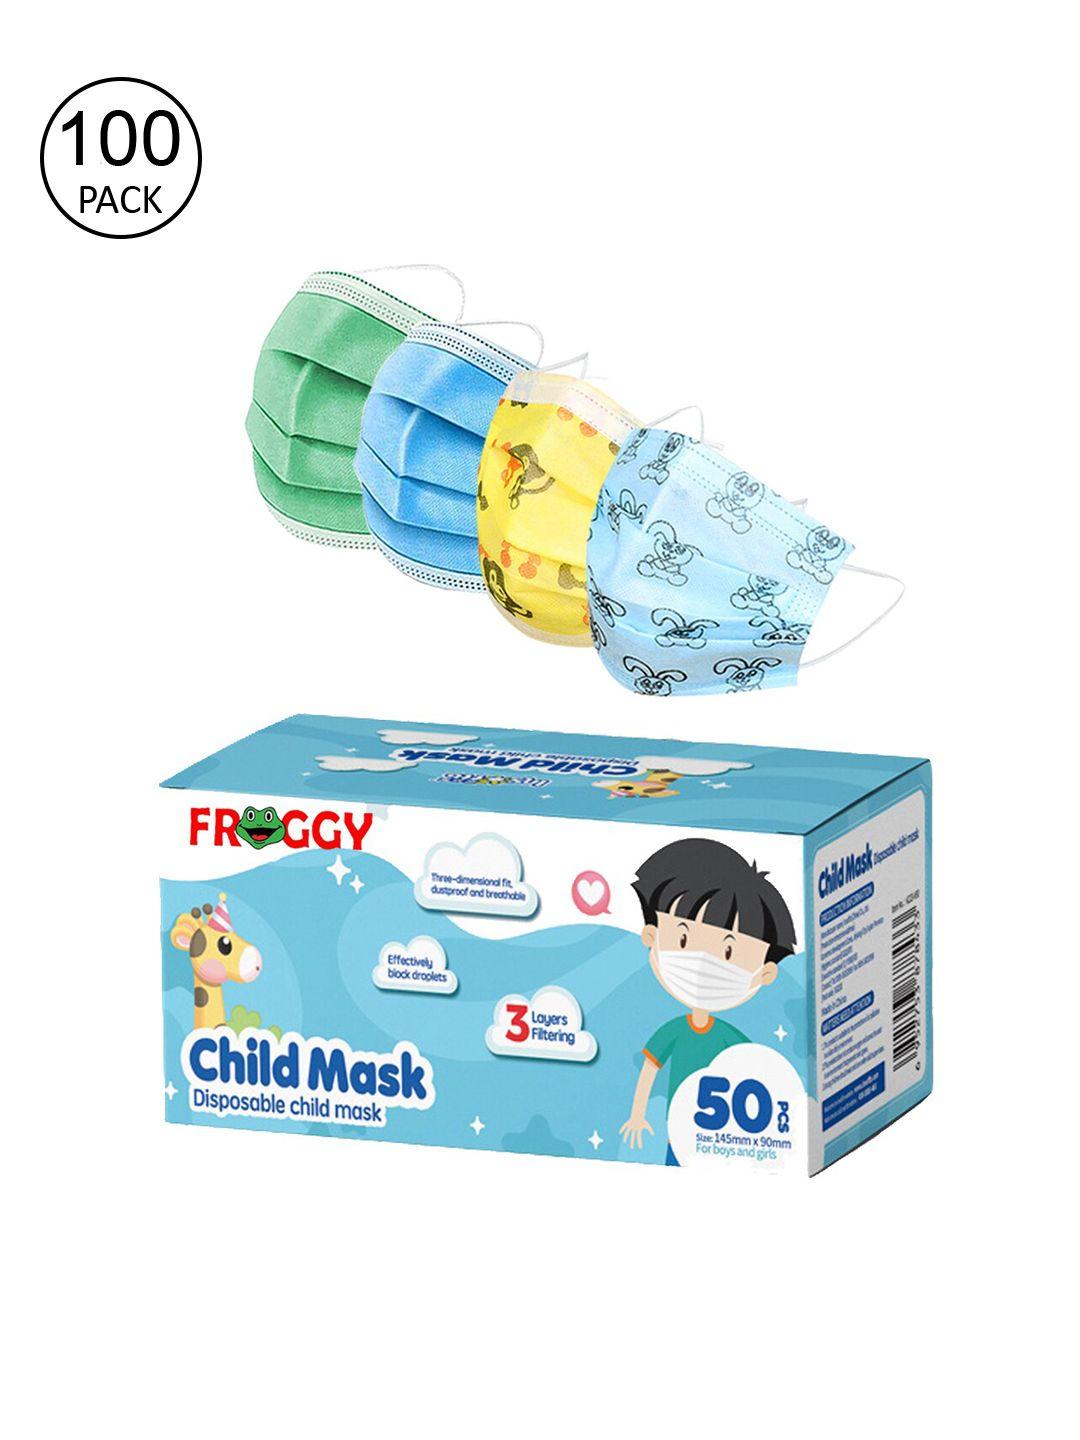 froggy kids pack of 100 3ply anti-pollution outdoor face mask